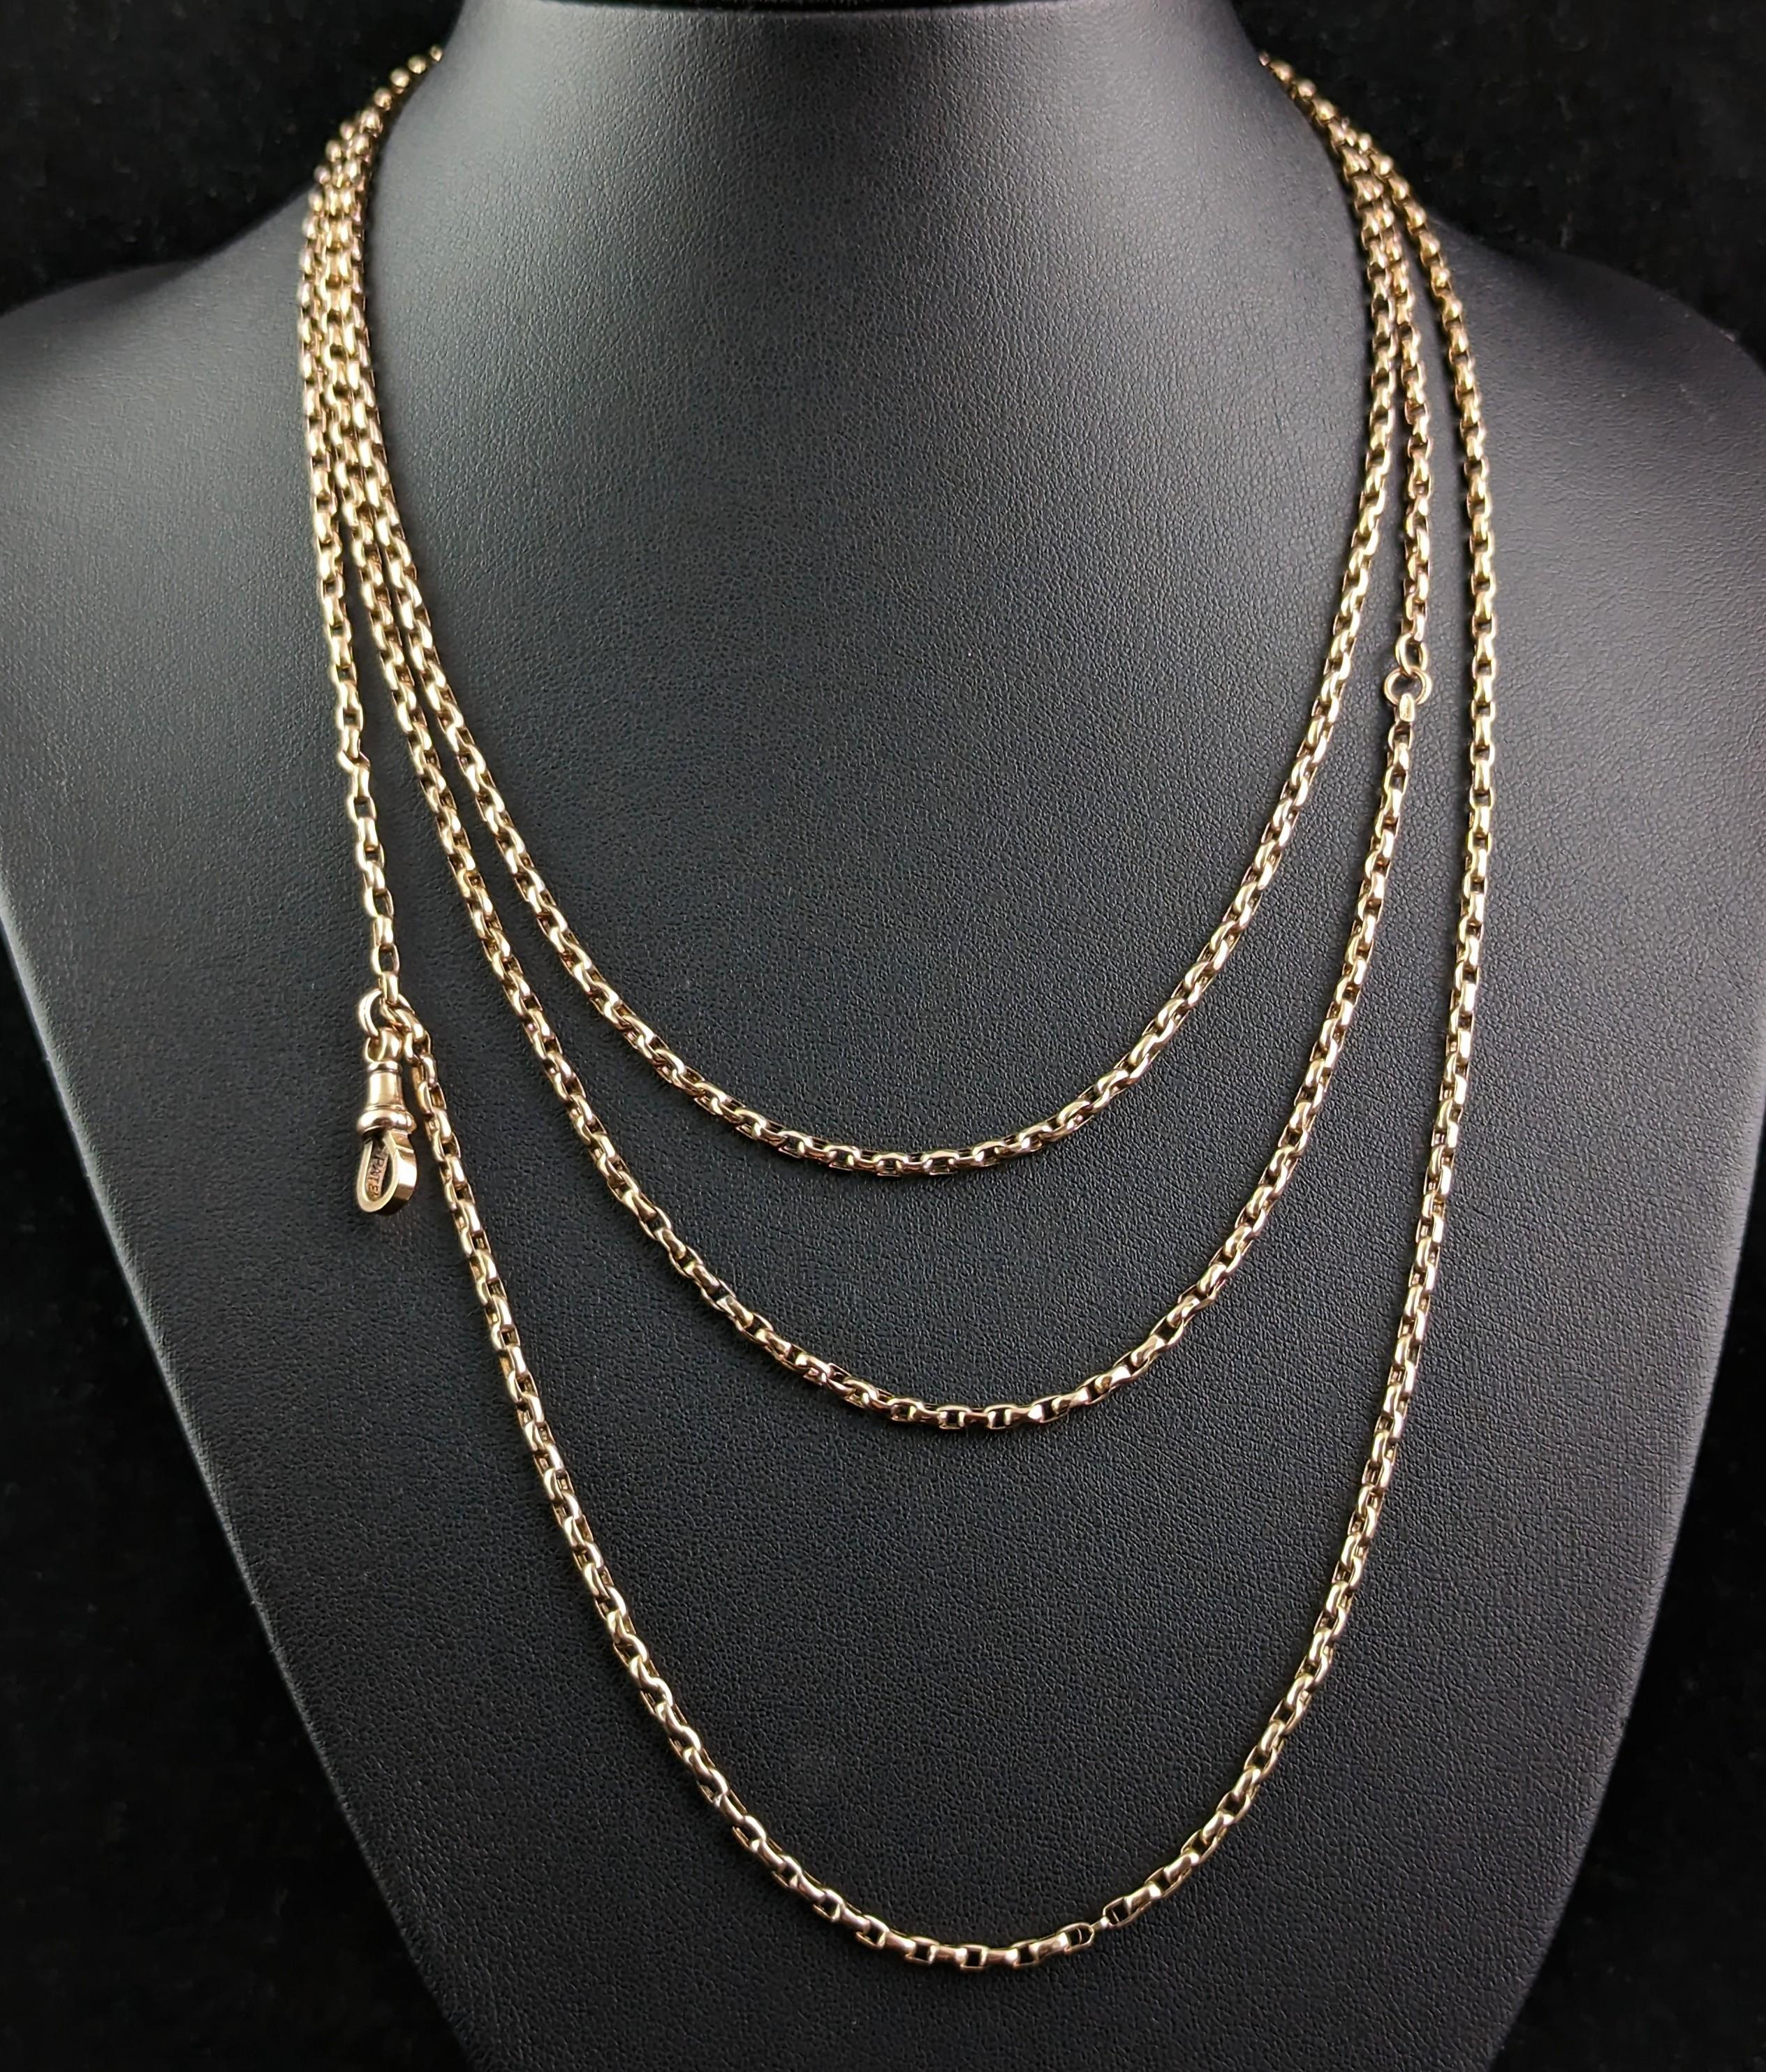 Antique 9k Yellow Gold Longuard Chain Necklace, Muff Chain 1